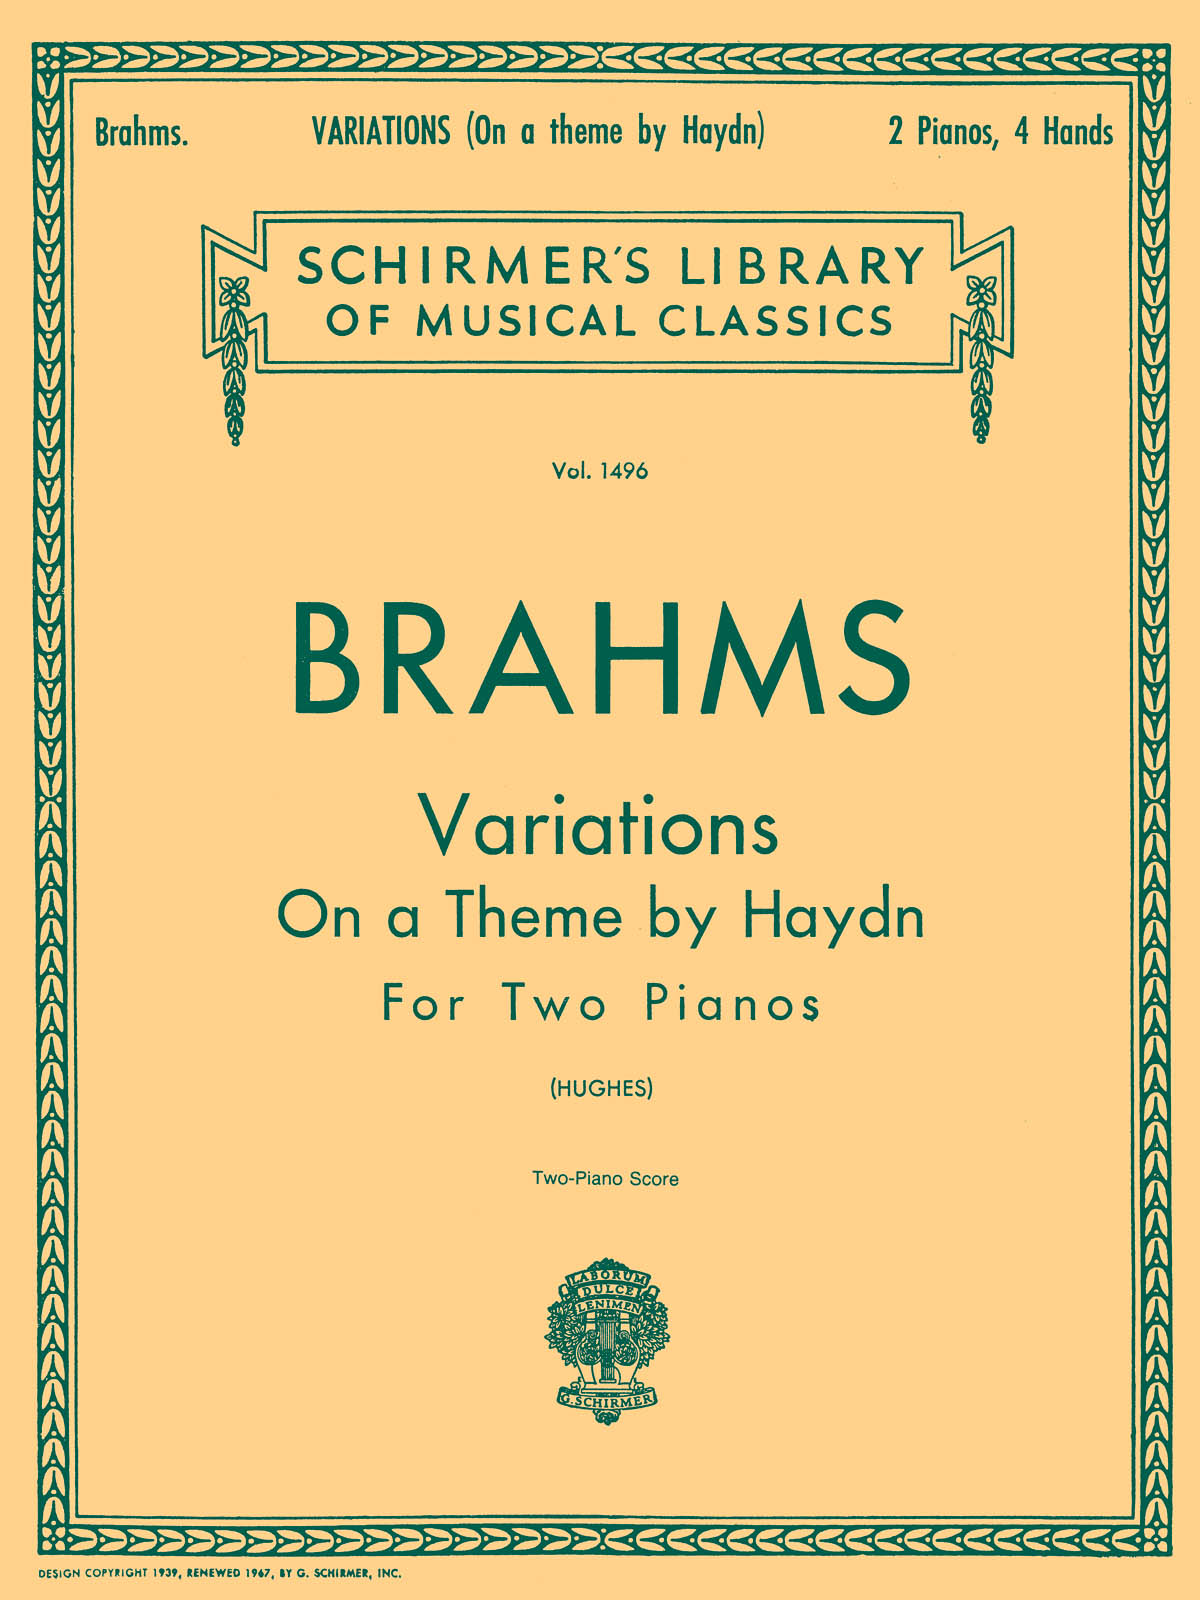 Johannes Brahms: Variations on a Theme by Haydn, Op. 56b